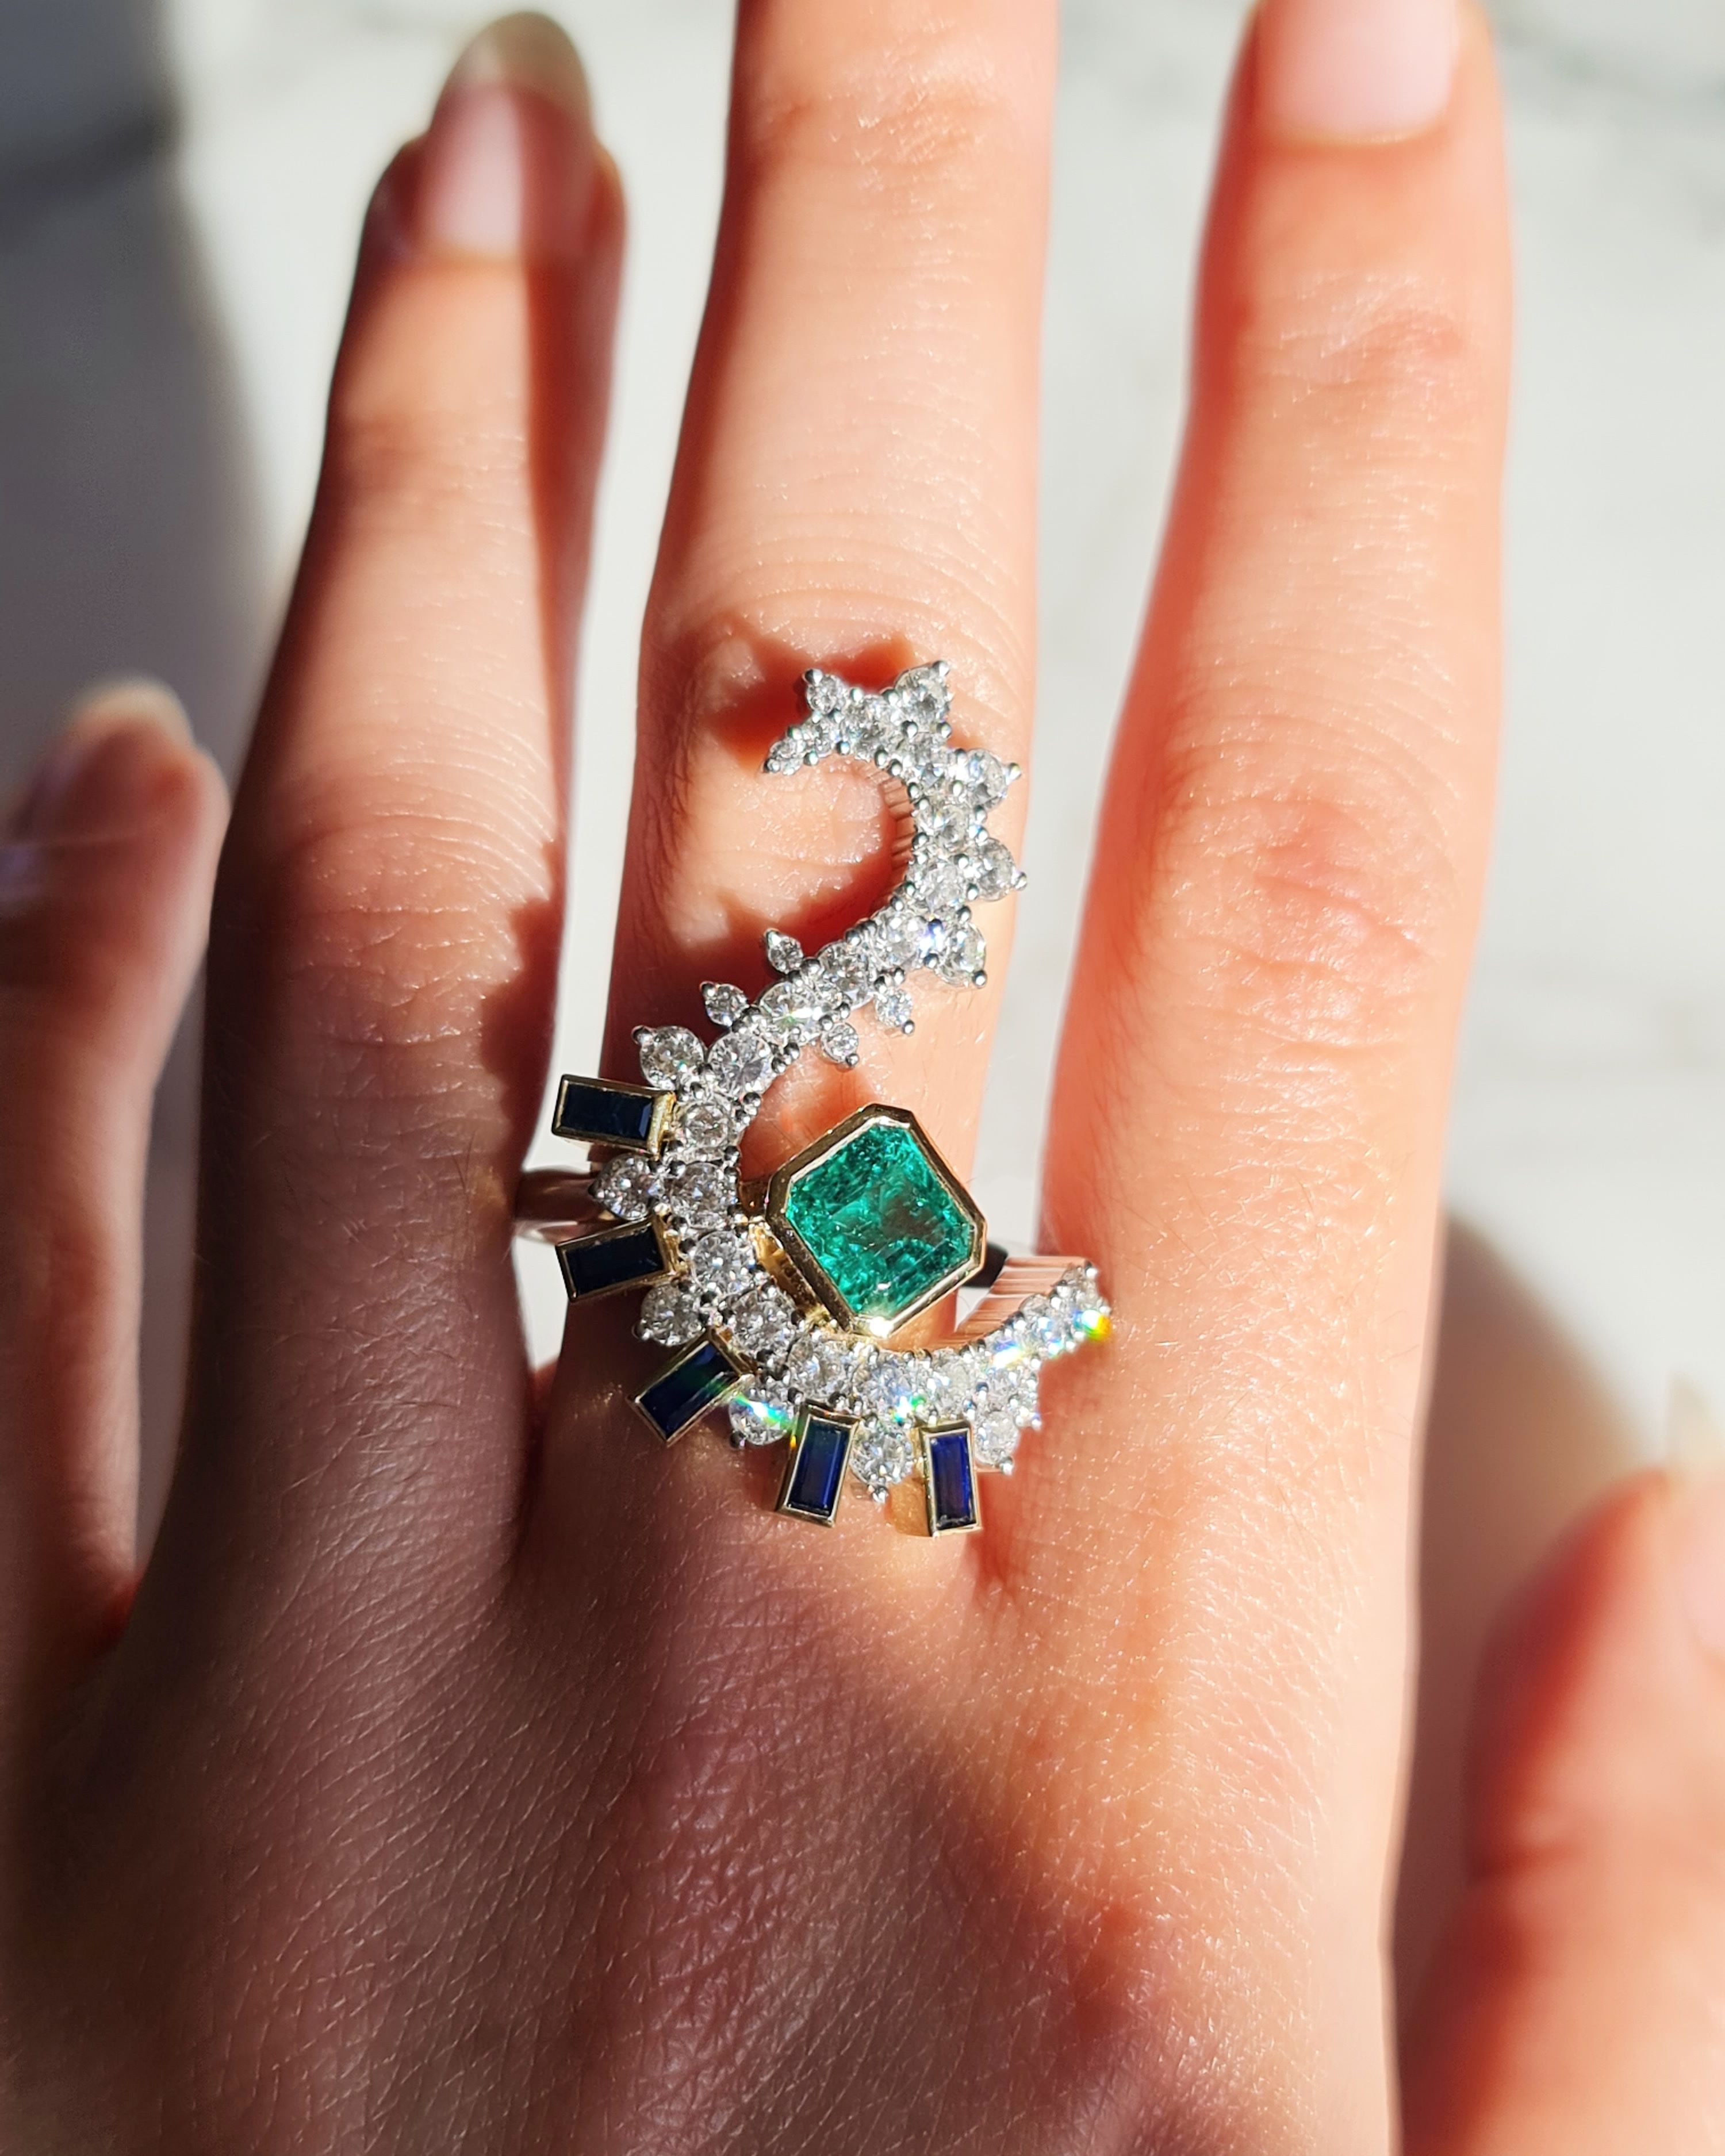 Layla Kaisi Collection bespoke cocktail ring featuring a cushion cut emerald, pear cut white diamonds, and sapphires